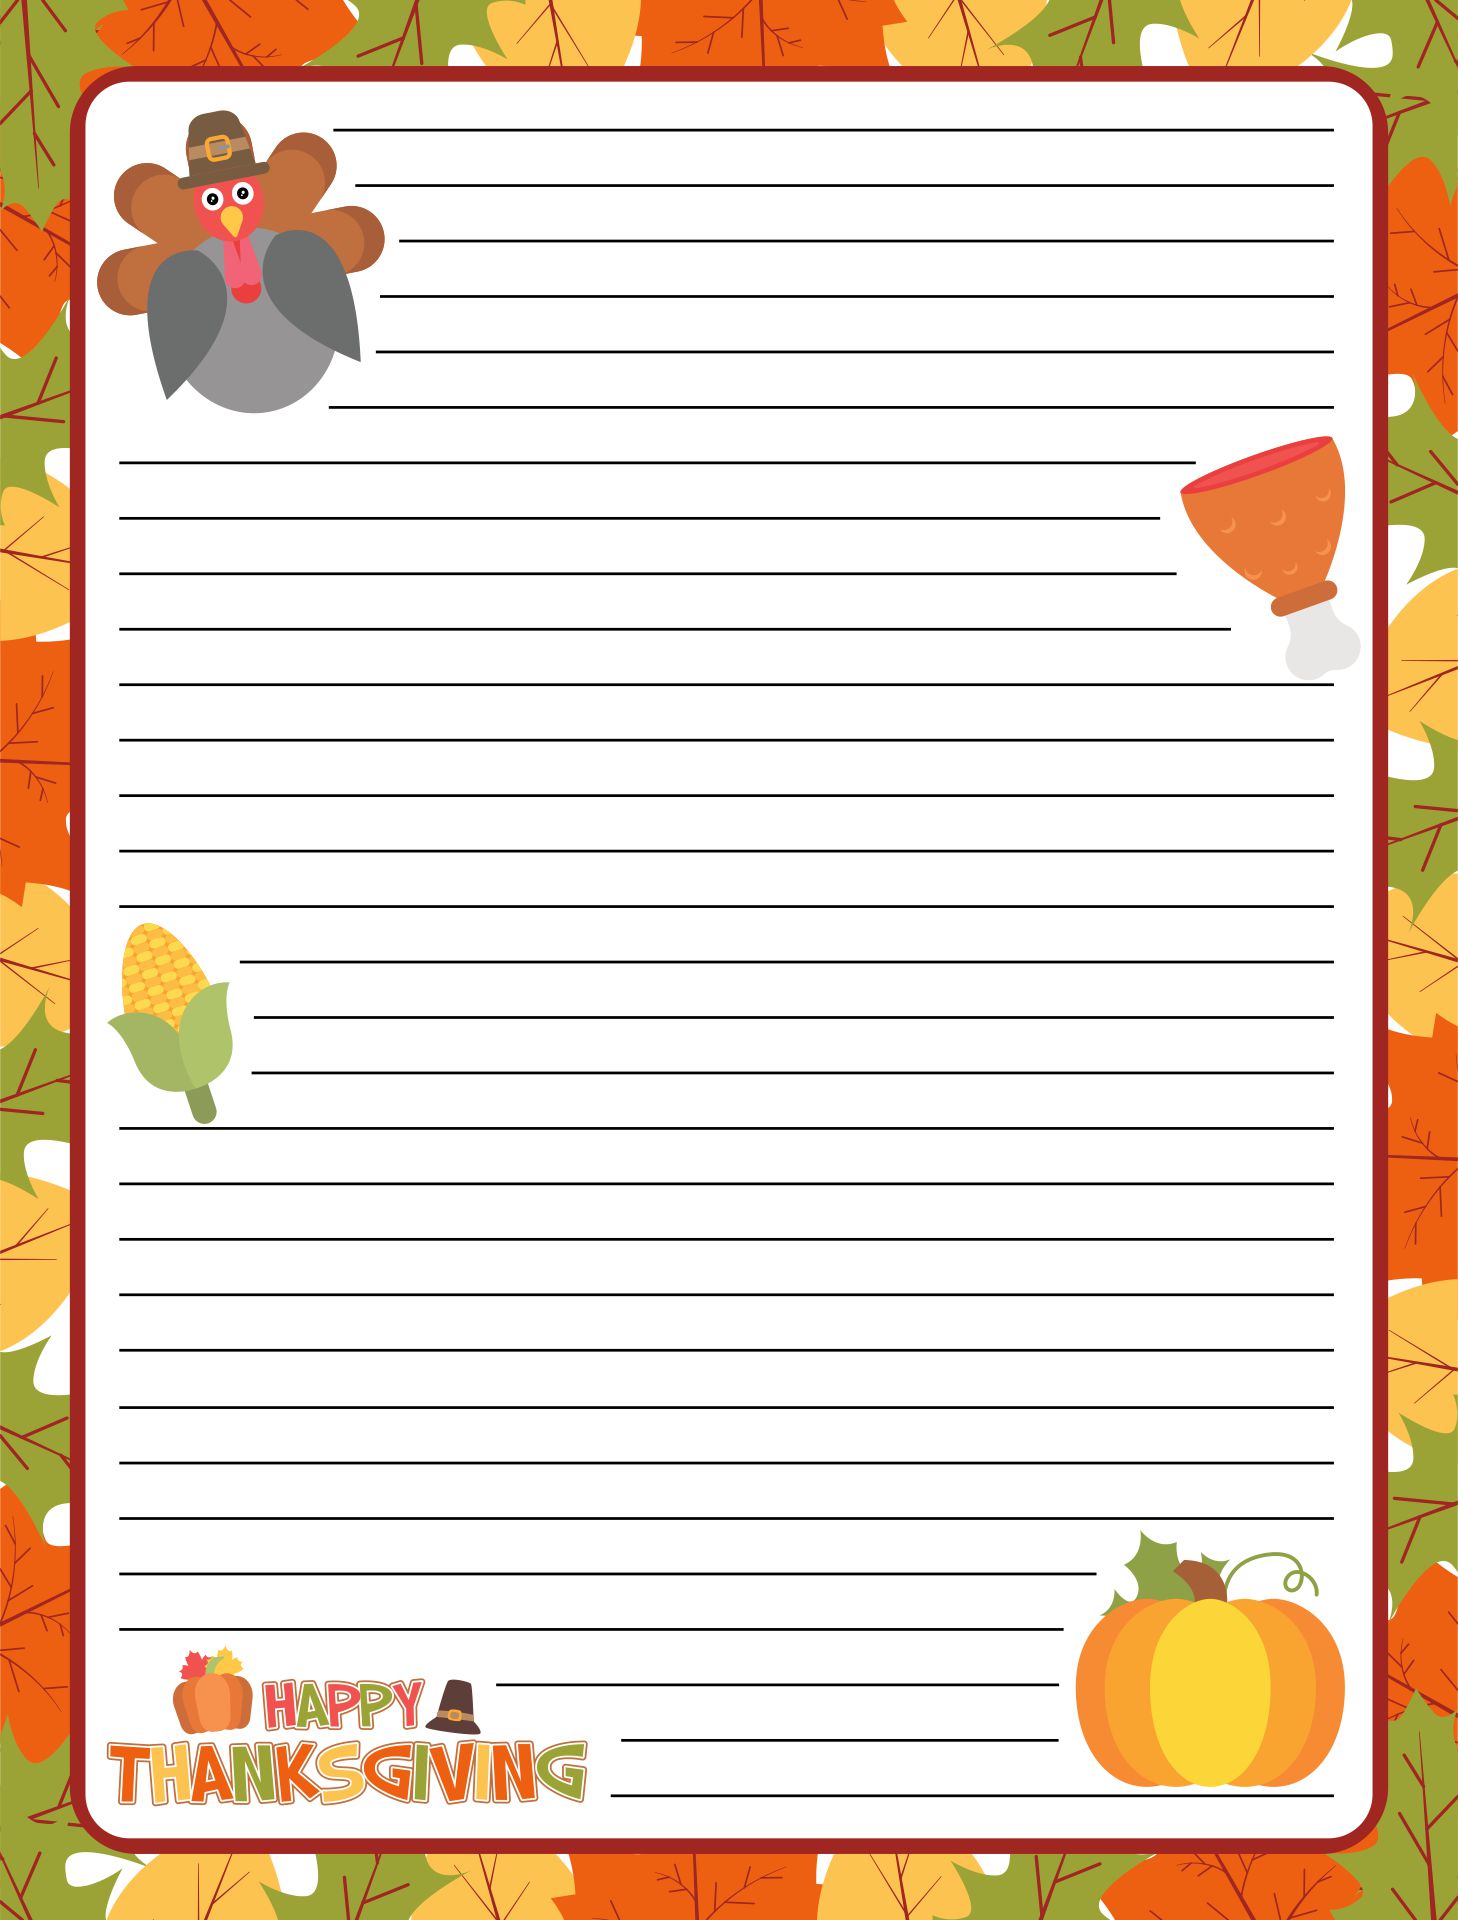 Printable Thanksgiving Lined Writing Paper